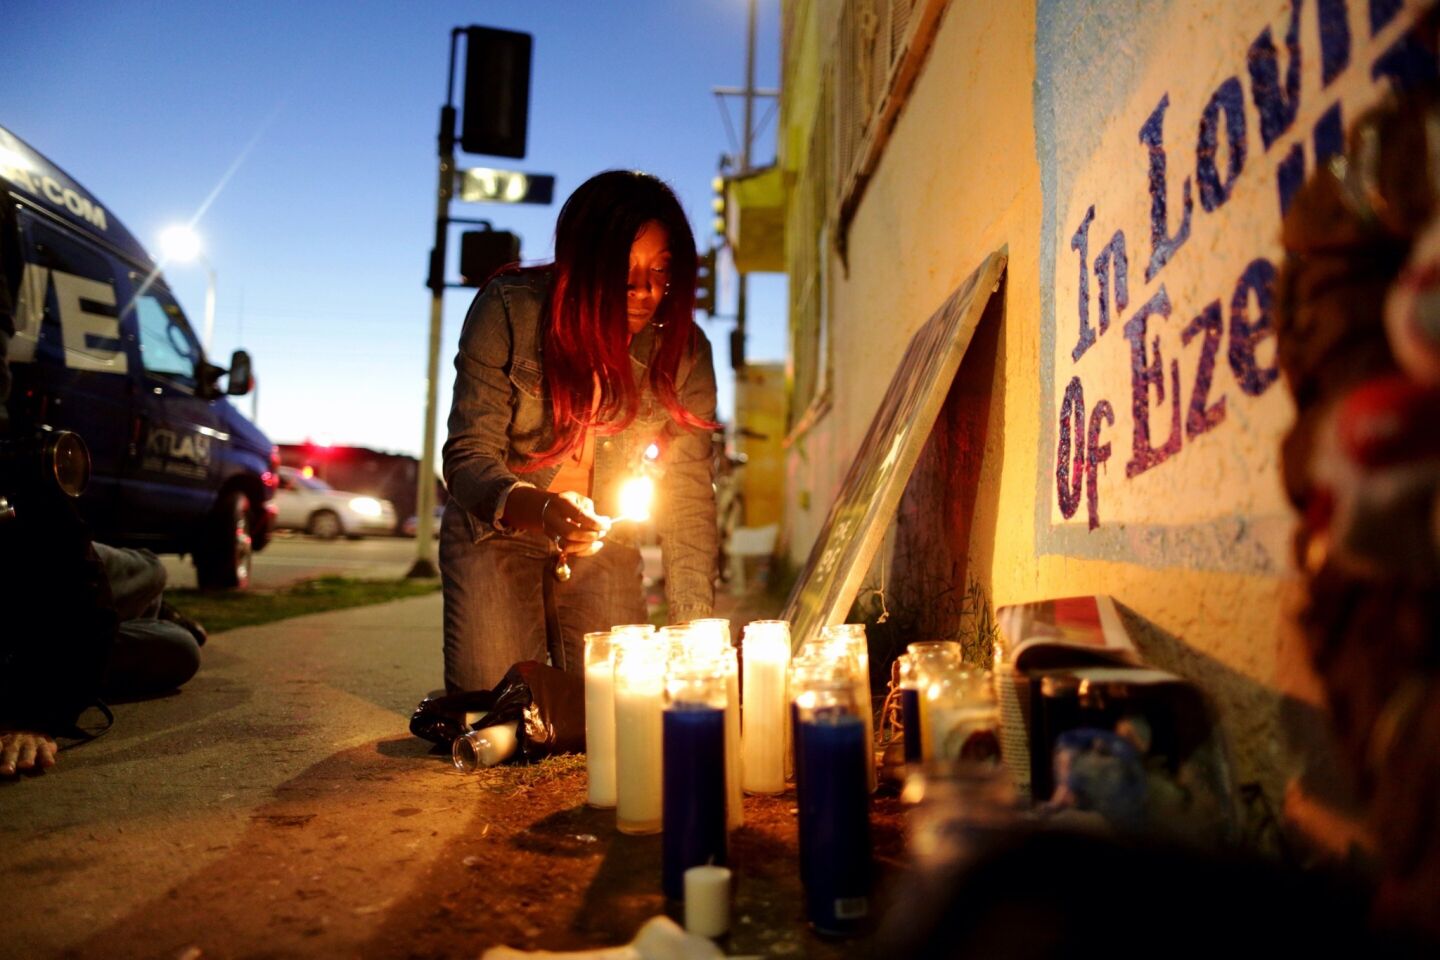 Tritobia Ford, mother of Ezell Ford, lights candles at her slain son's memorial at 65th Street and Broadway after the LAPD released Ezell Ford's autopsy results.